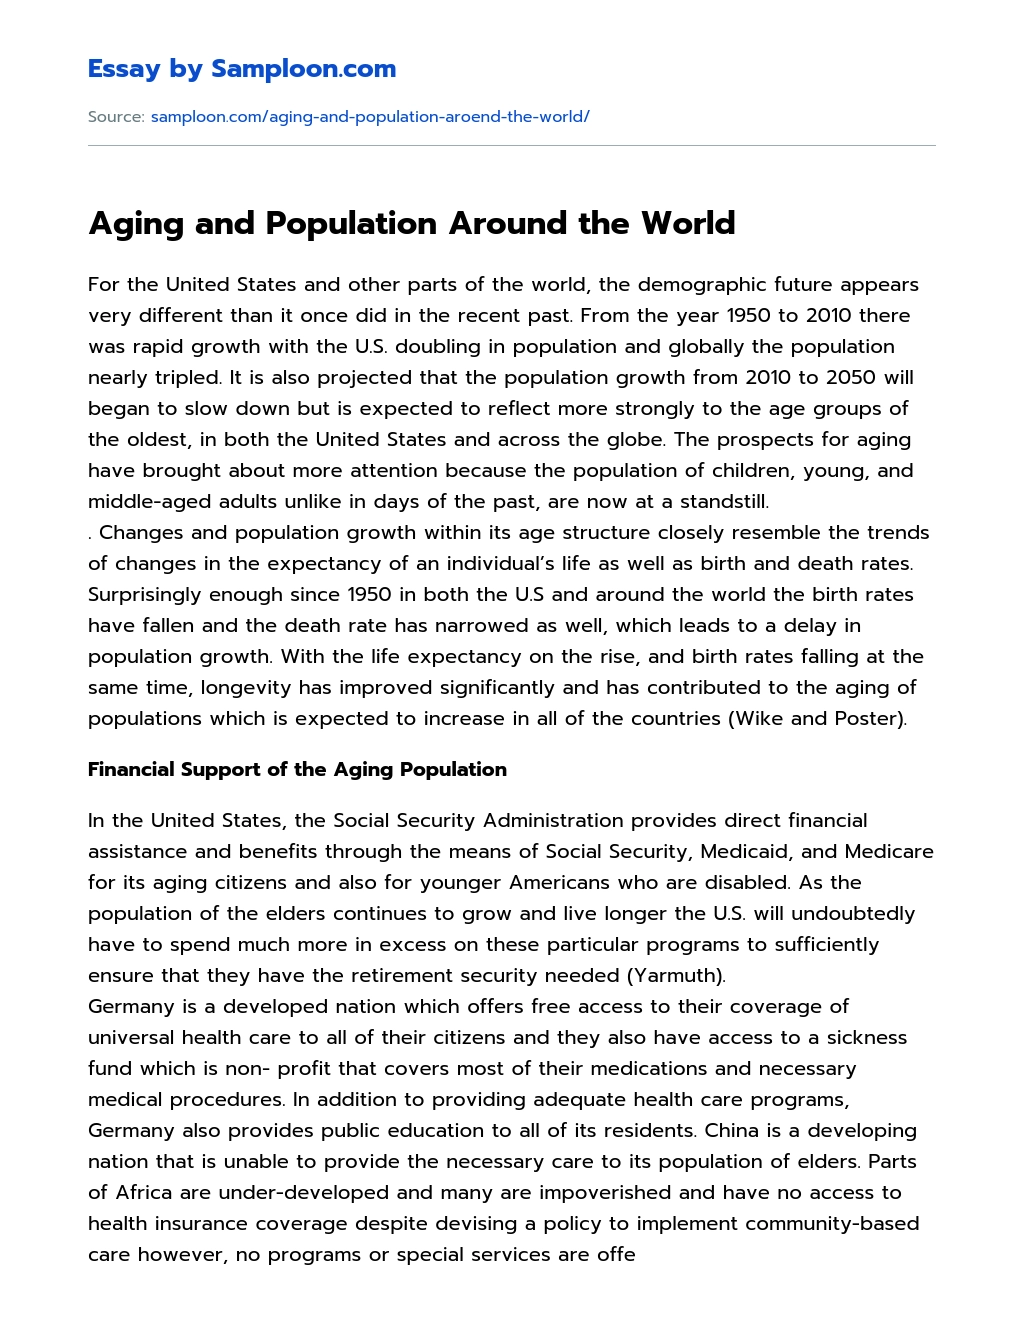 Aging and Population Around the World essay